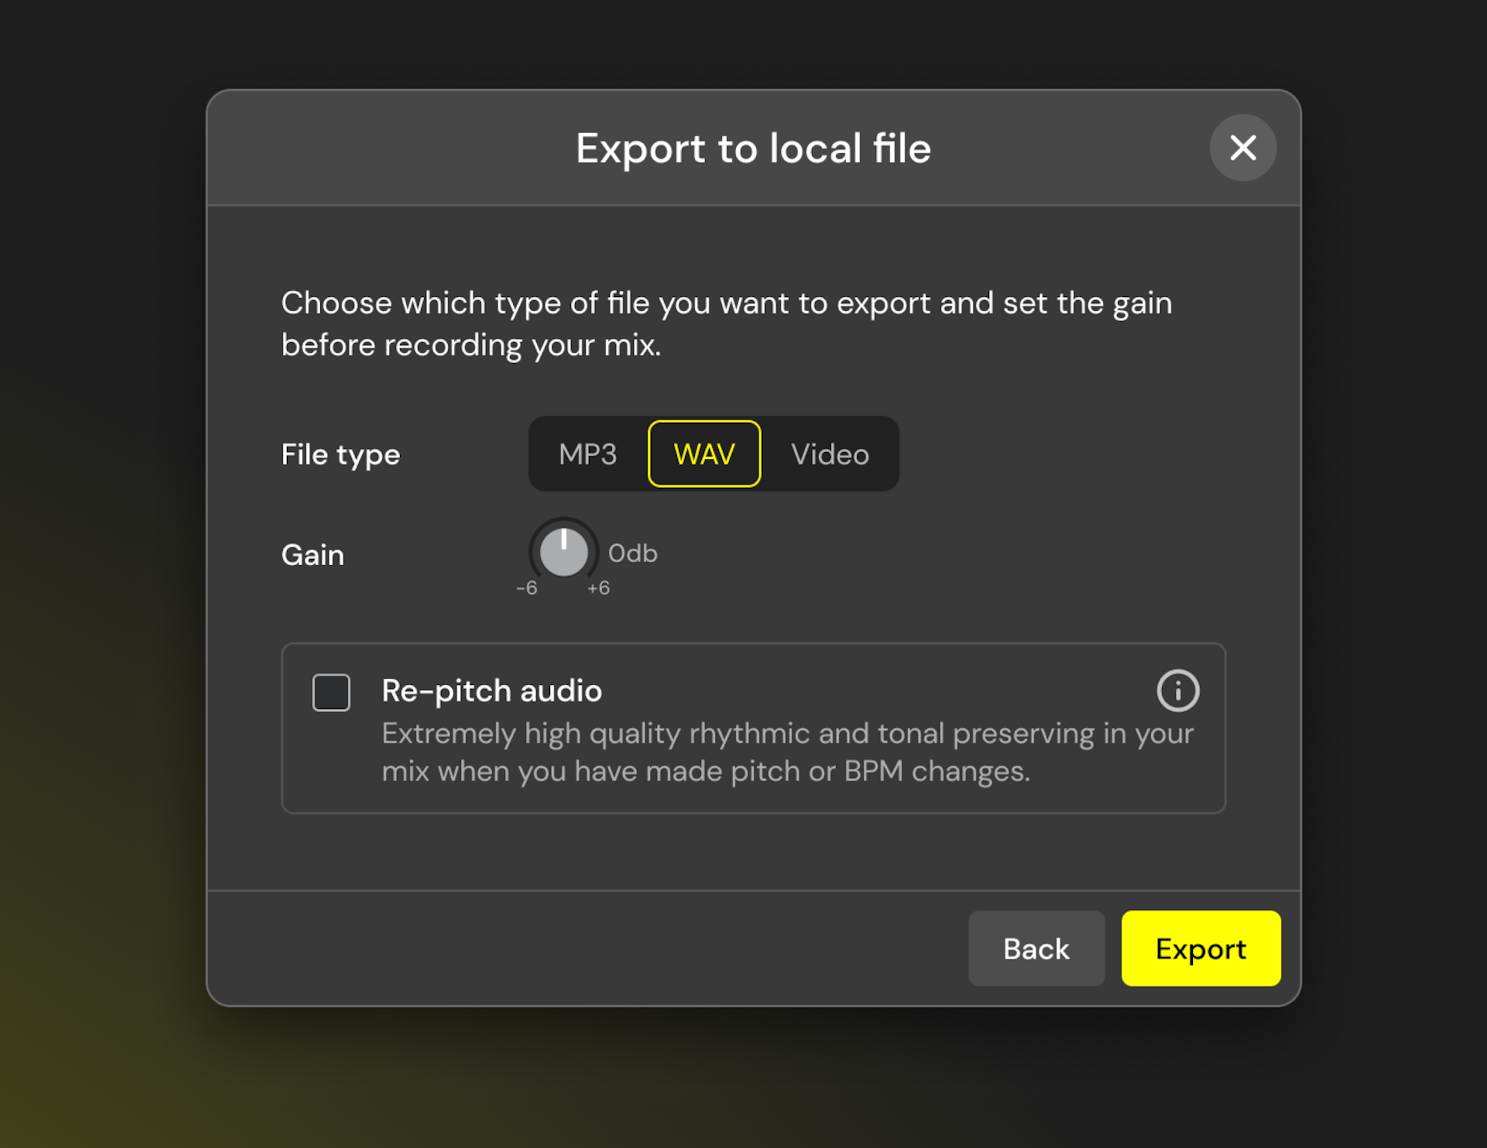 Export to local file